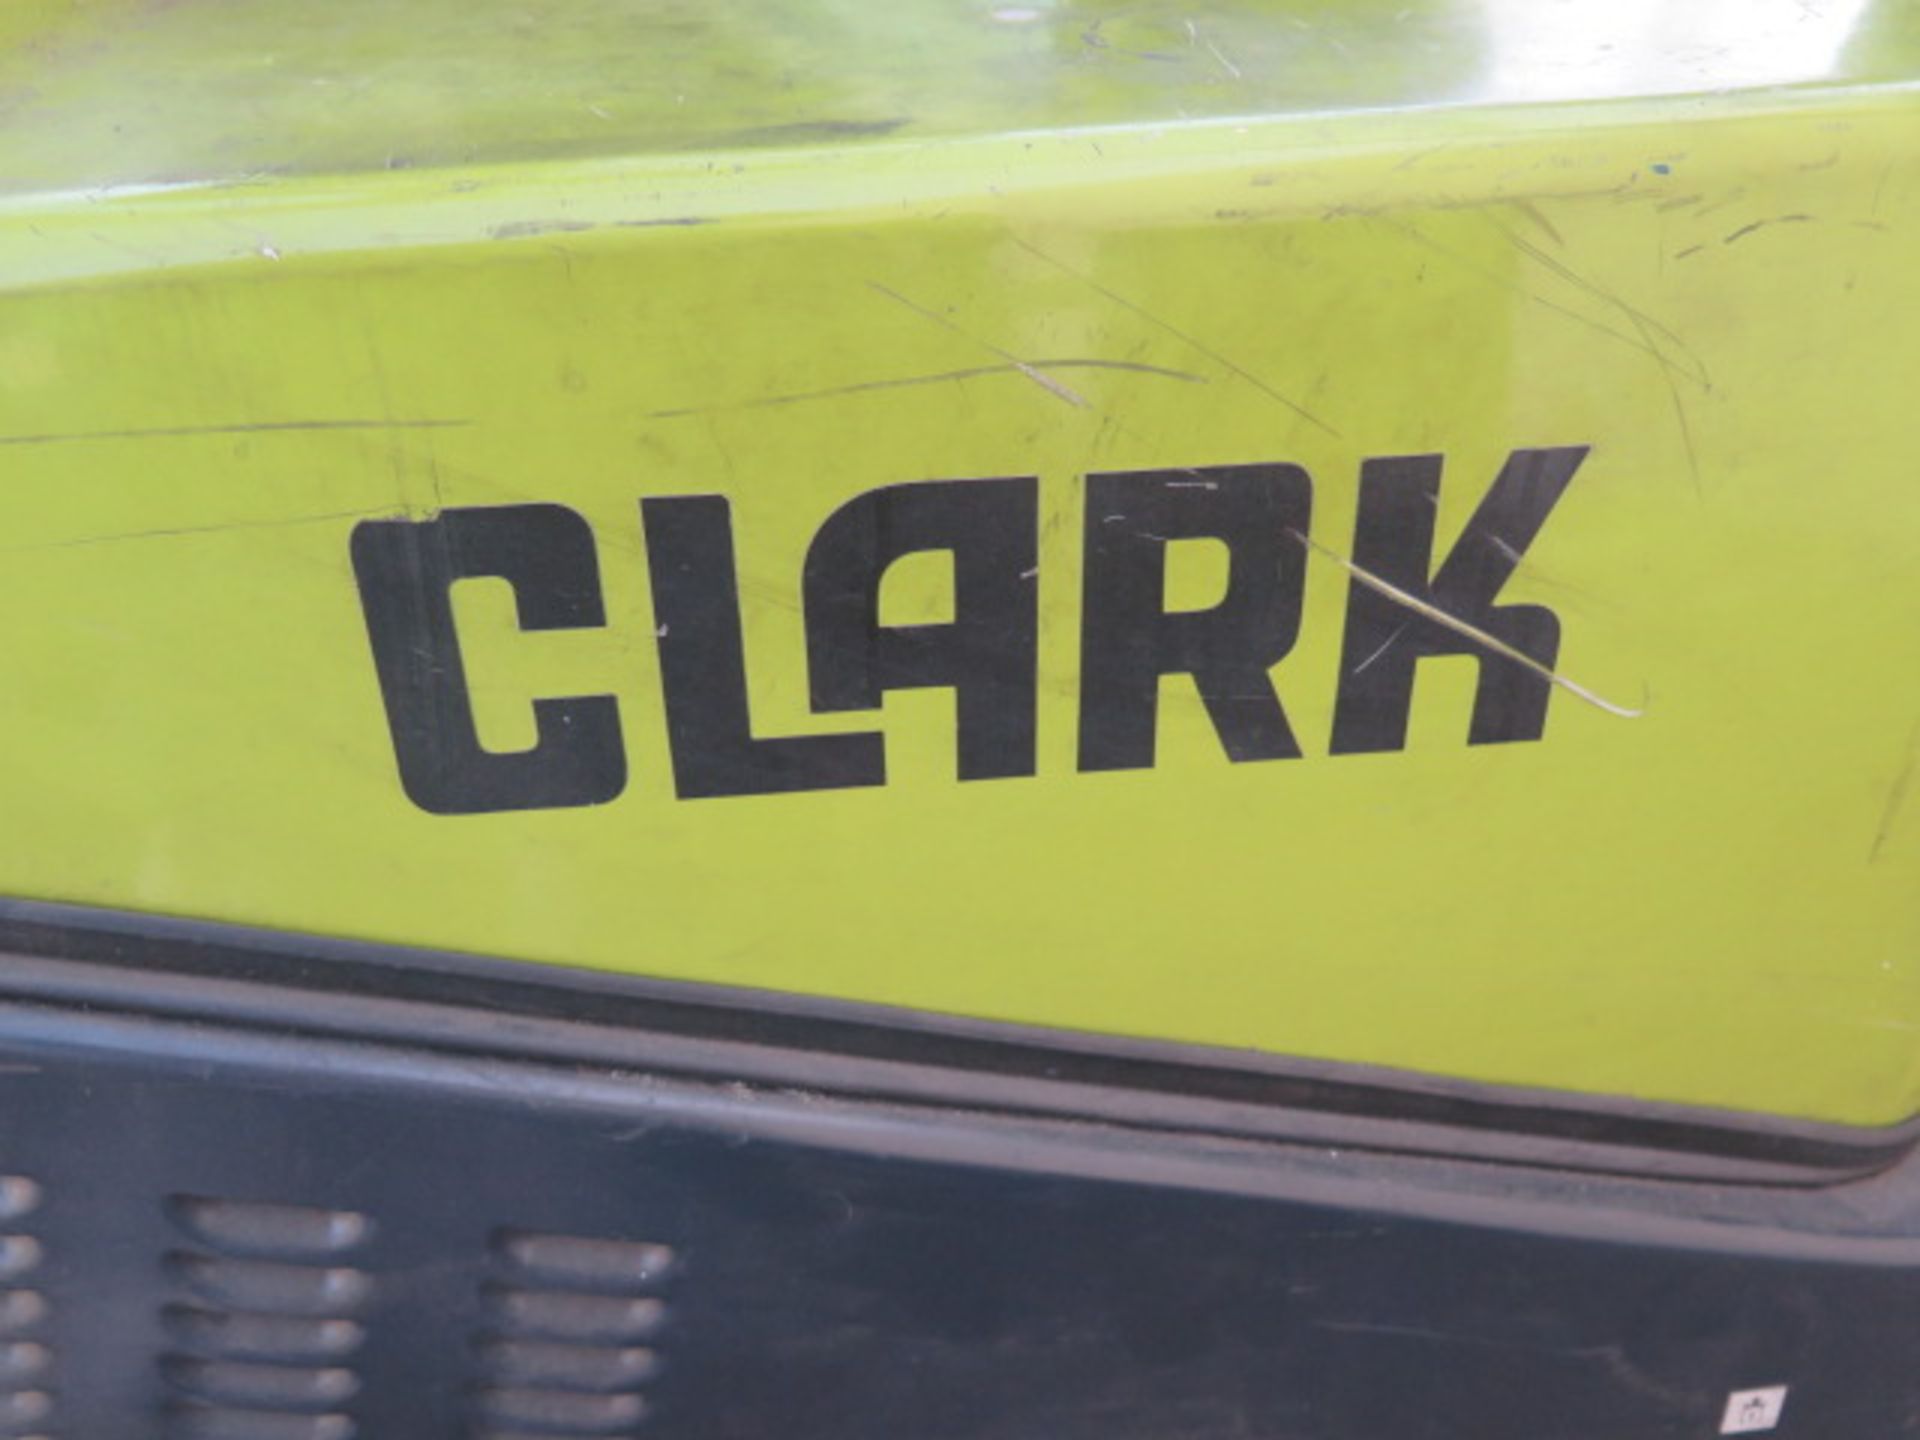 Clark C25 5000 Lb LPG Forklift s/n P-2321-0460-9862CNF w/ 3-Stage, 189" Lift, Side Shift, SOLD AS IS - Image 4 of 18